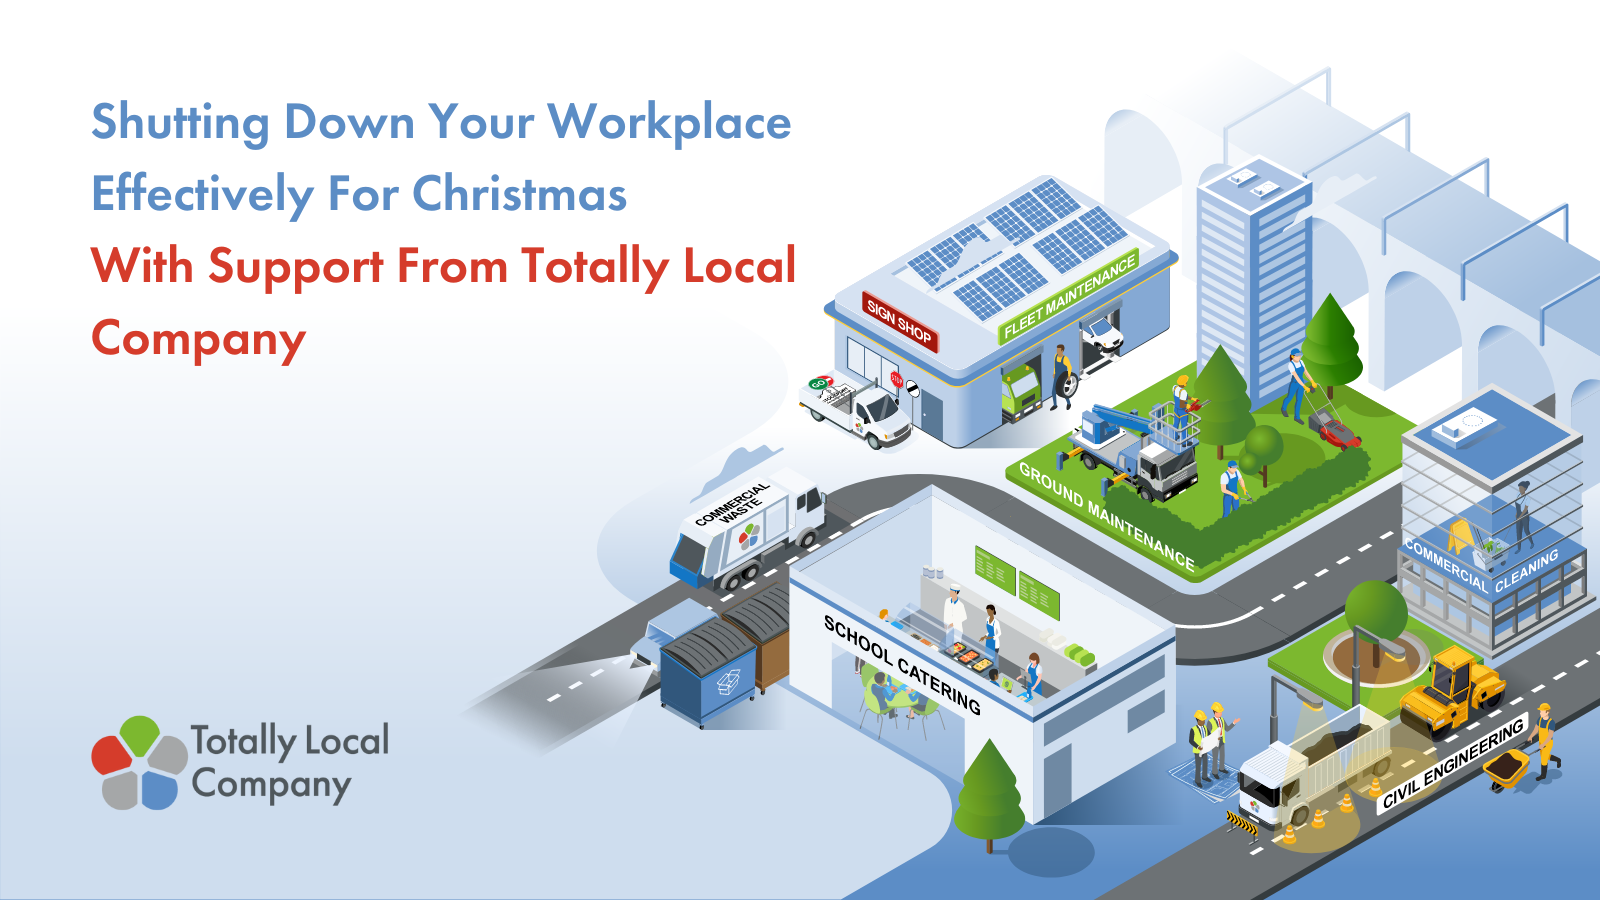 Shutting Down Your Workplace Effectively For Christmas – With Support From Totally Local Company